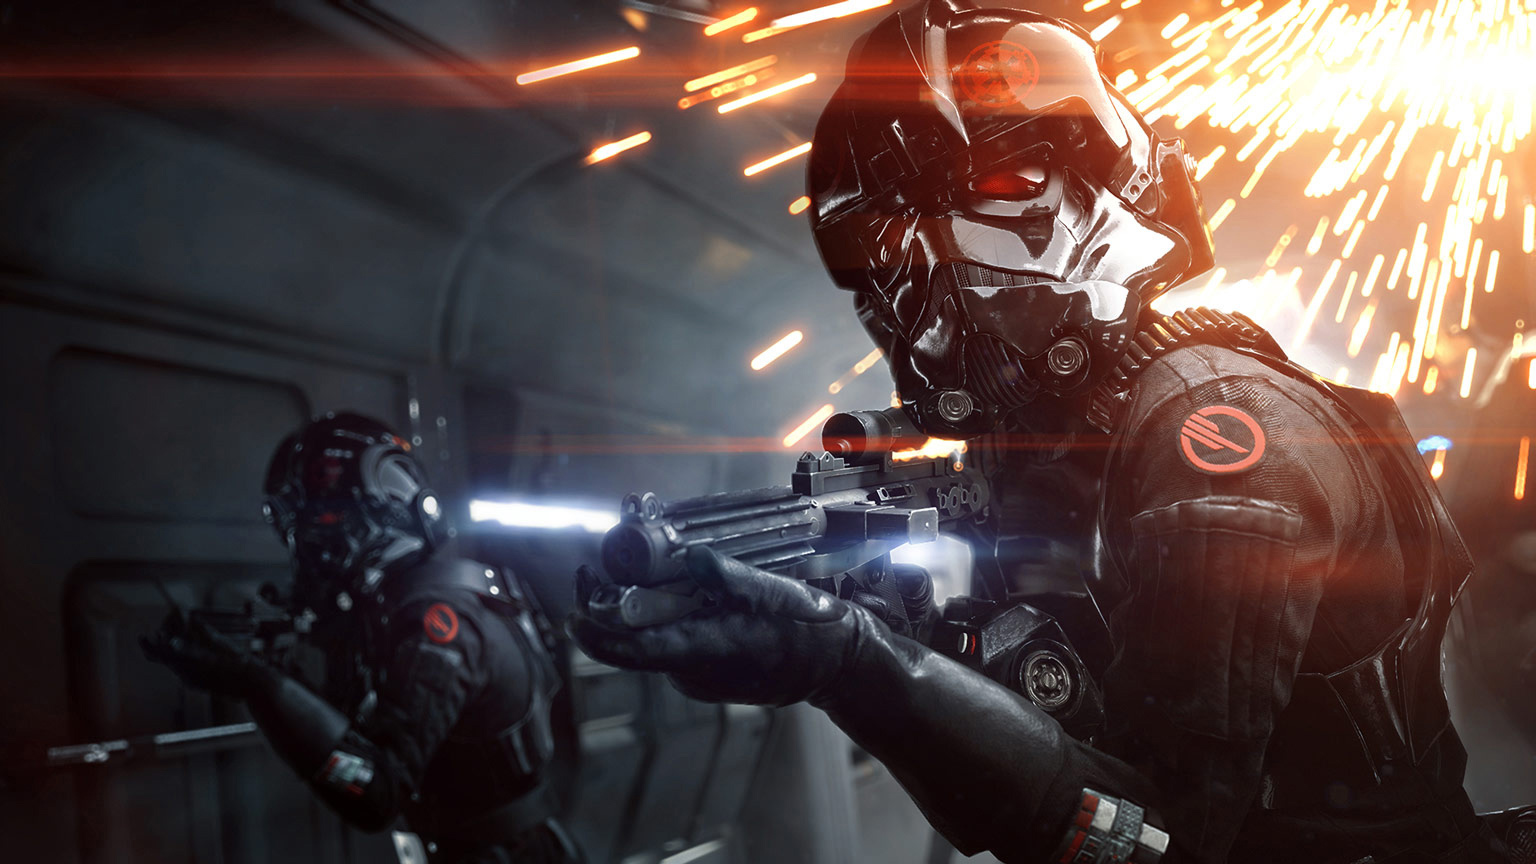 Star Wars Battlefront II is worth grabbing while it's free on PC –  Destructoid